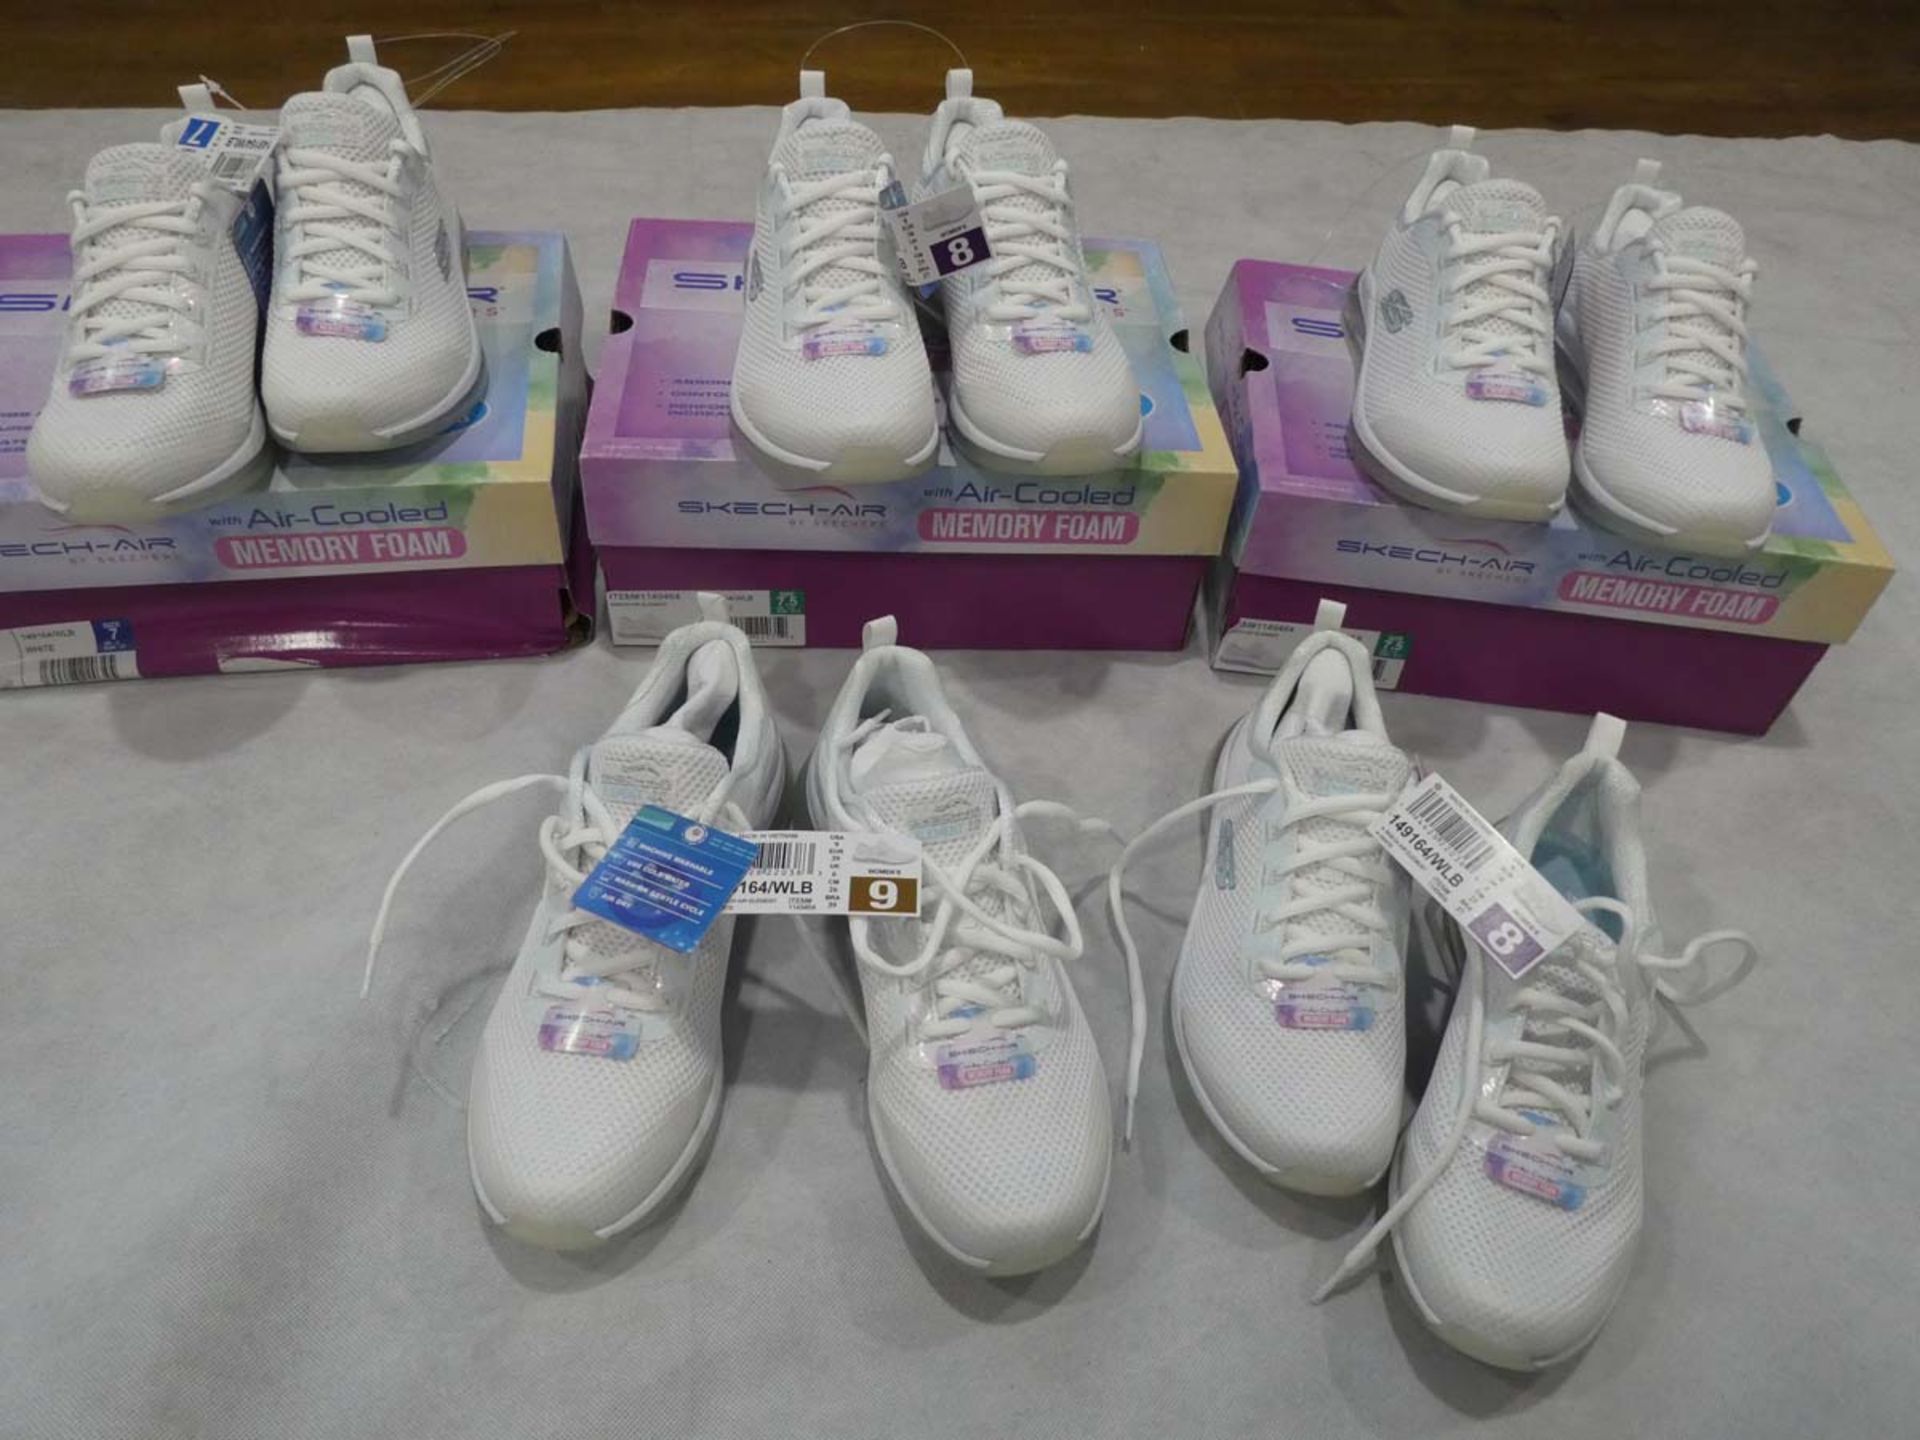 5 Boxed pairs of sketchers air cooled memory foam white trainer shoes in various sizes